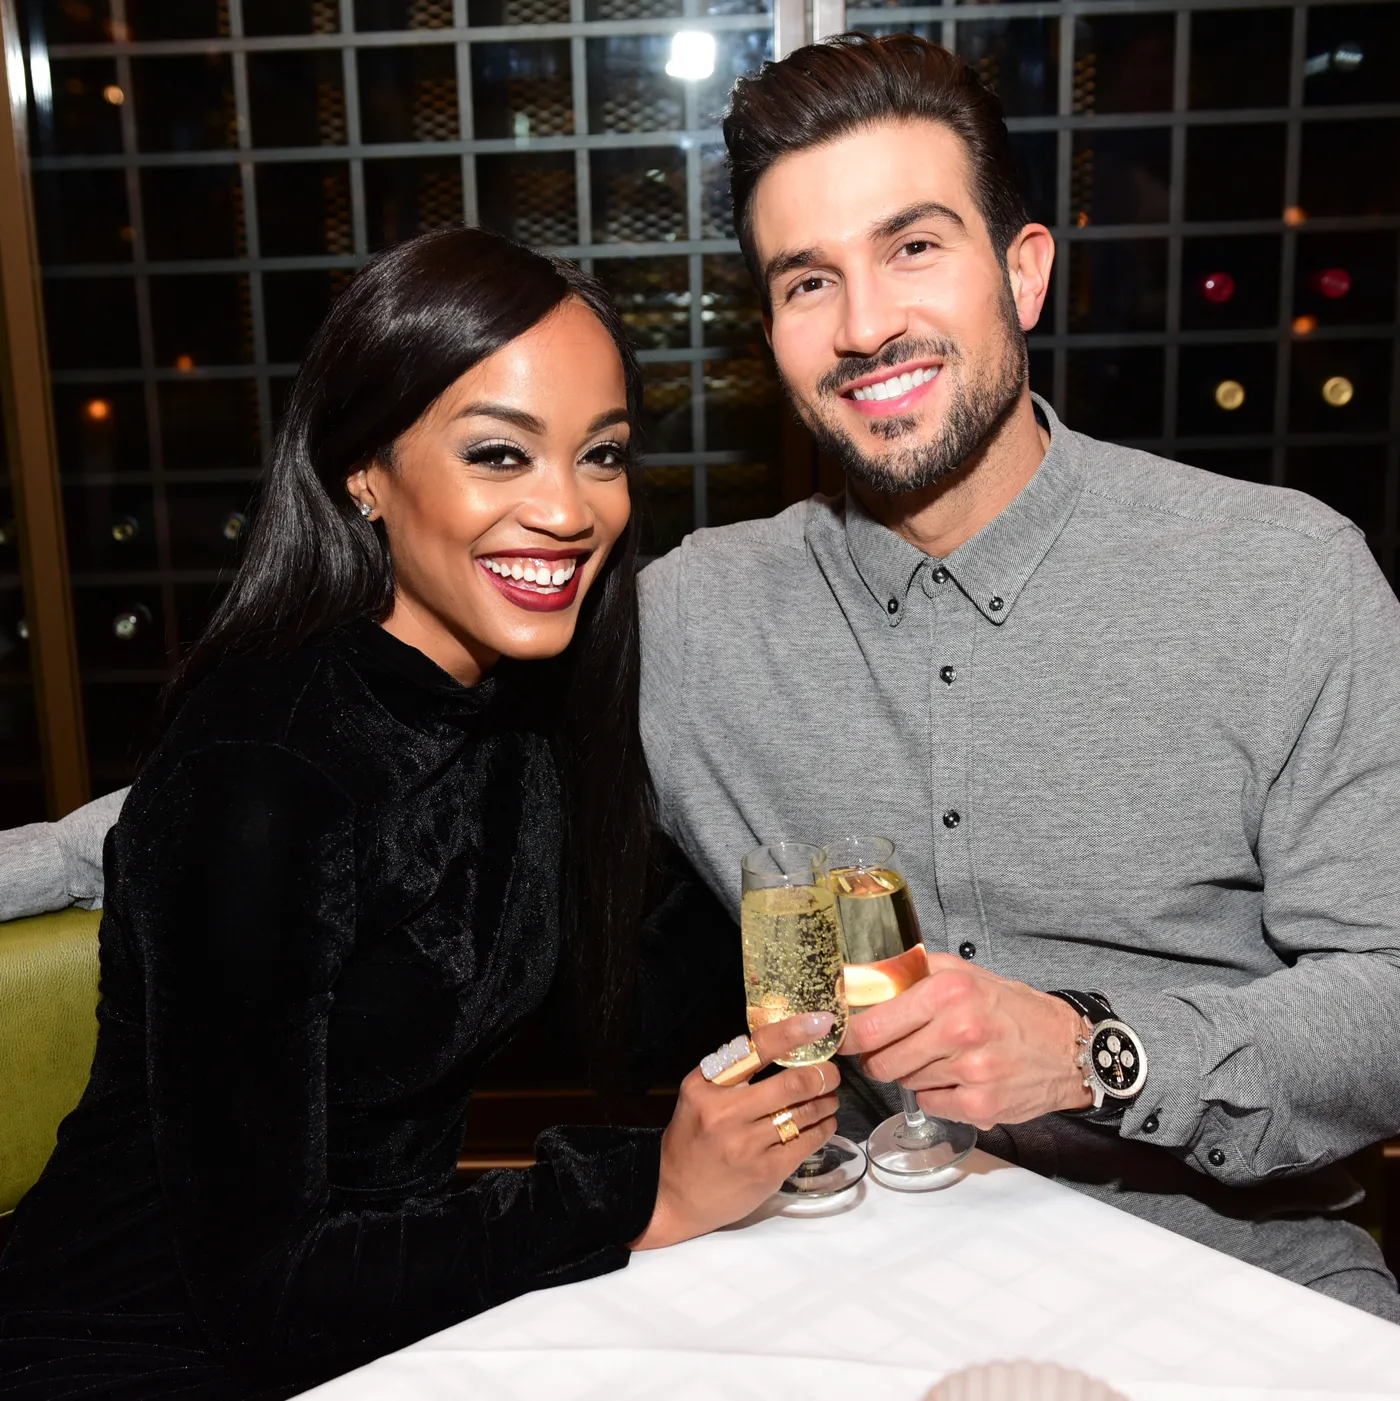 ‘Bachelorette’ Star Rachel Lindsay’s Estranged Husband Pleads For Support to Vacate Marital Home, Claims Ex Controls Security Cameras and He Wants Out